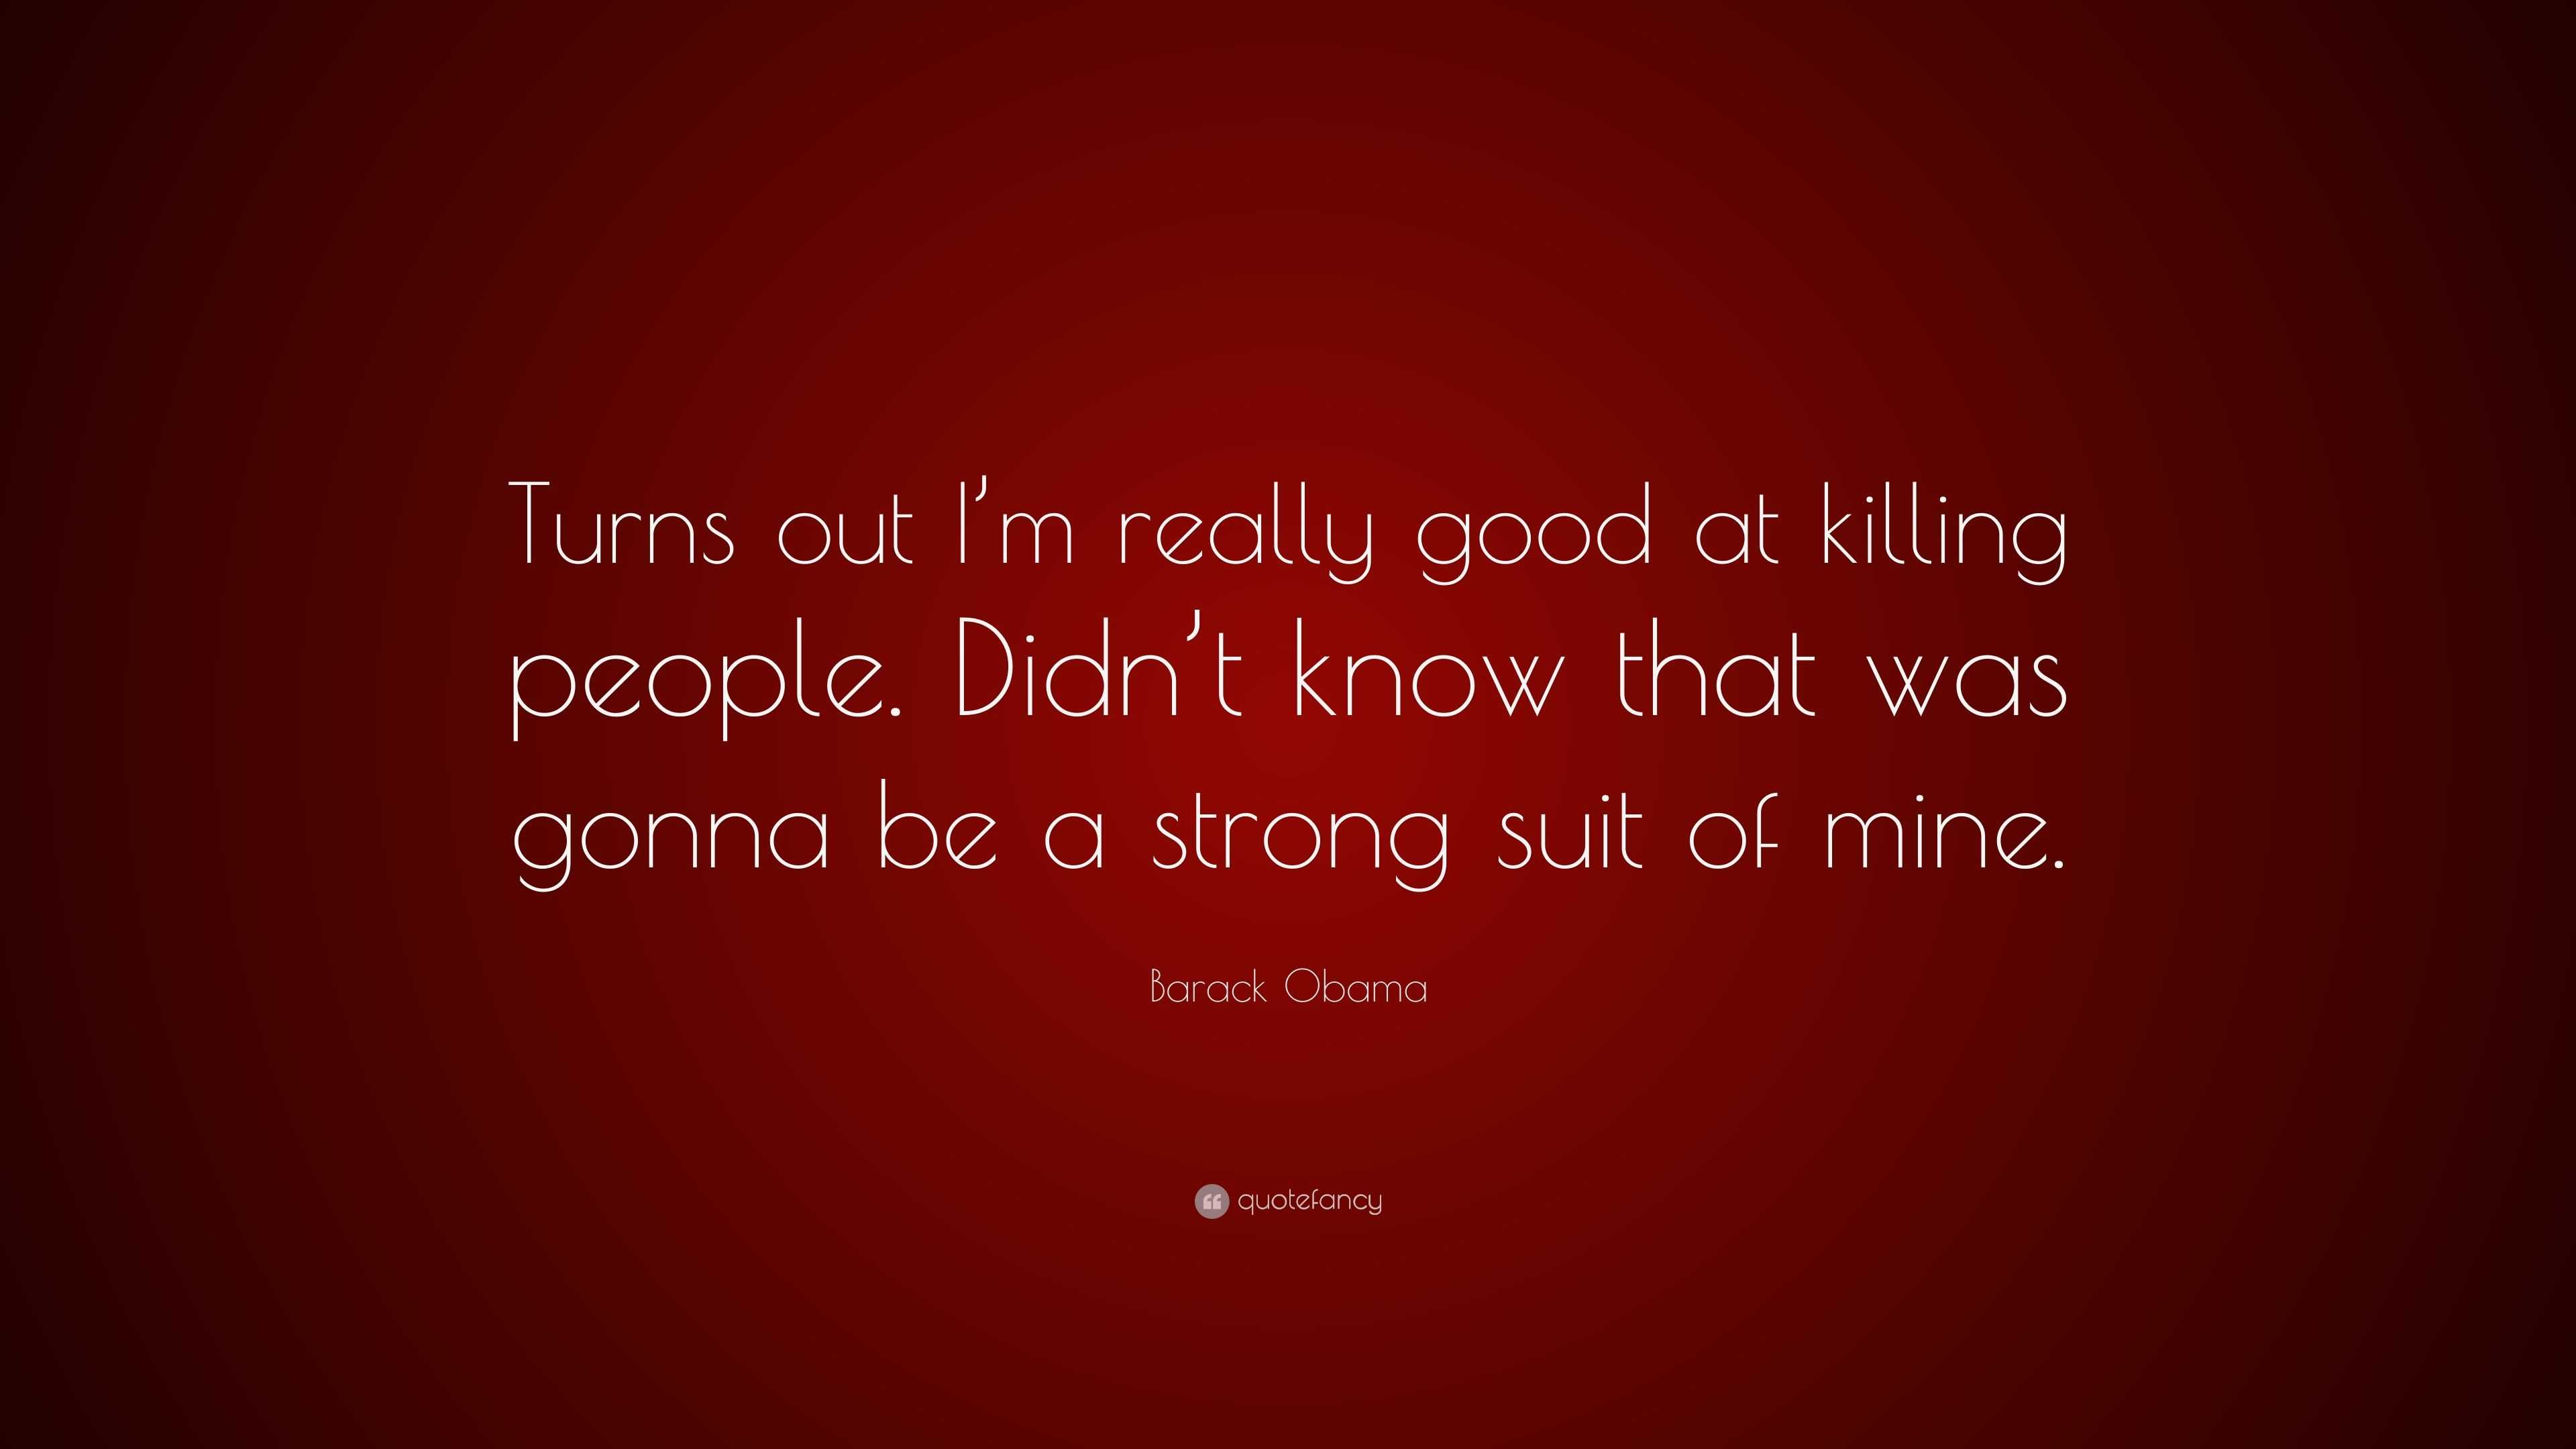 Barack Obama Quote: “Turns out I’m really good at killing people. Didn ...